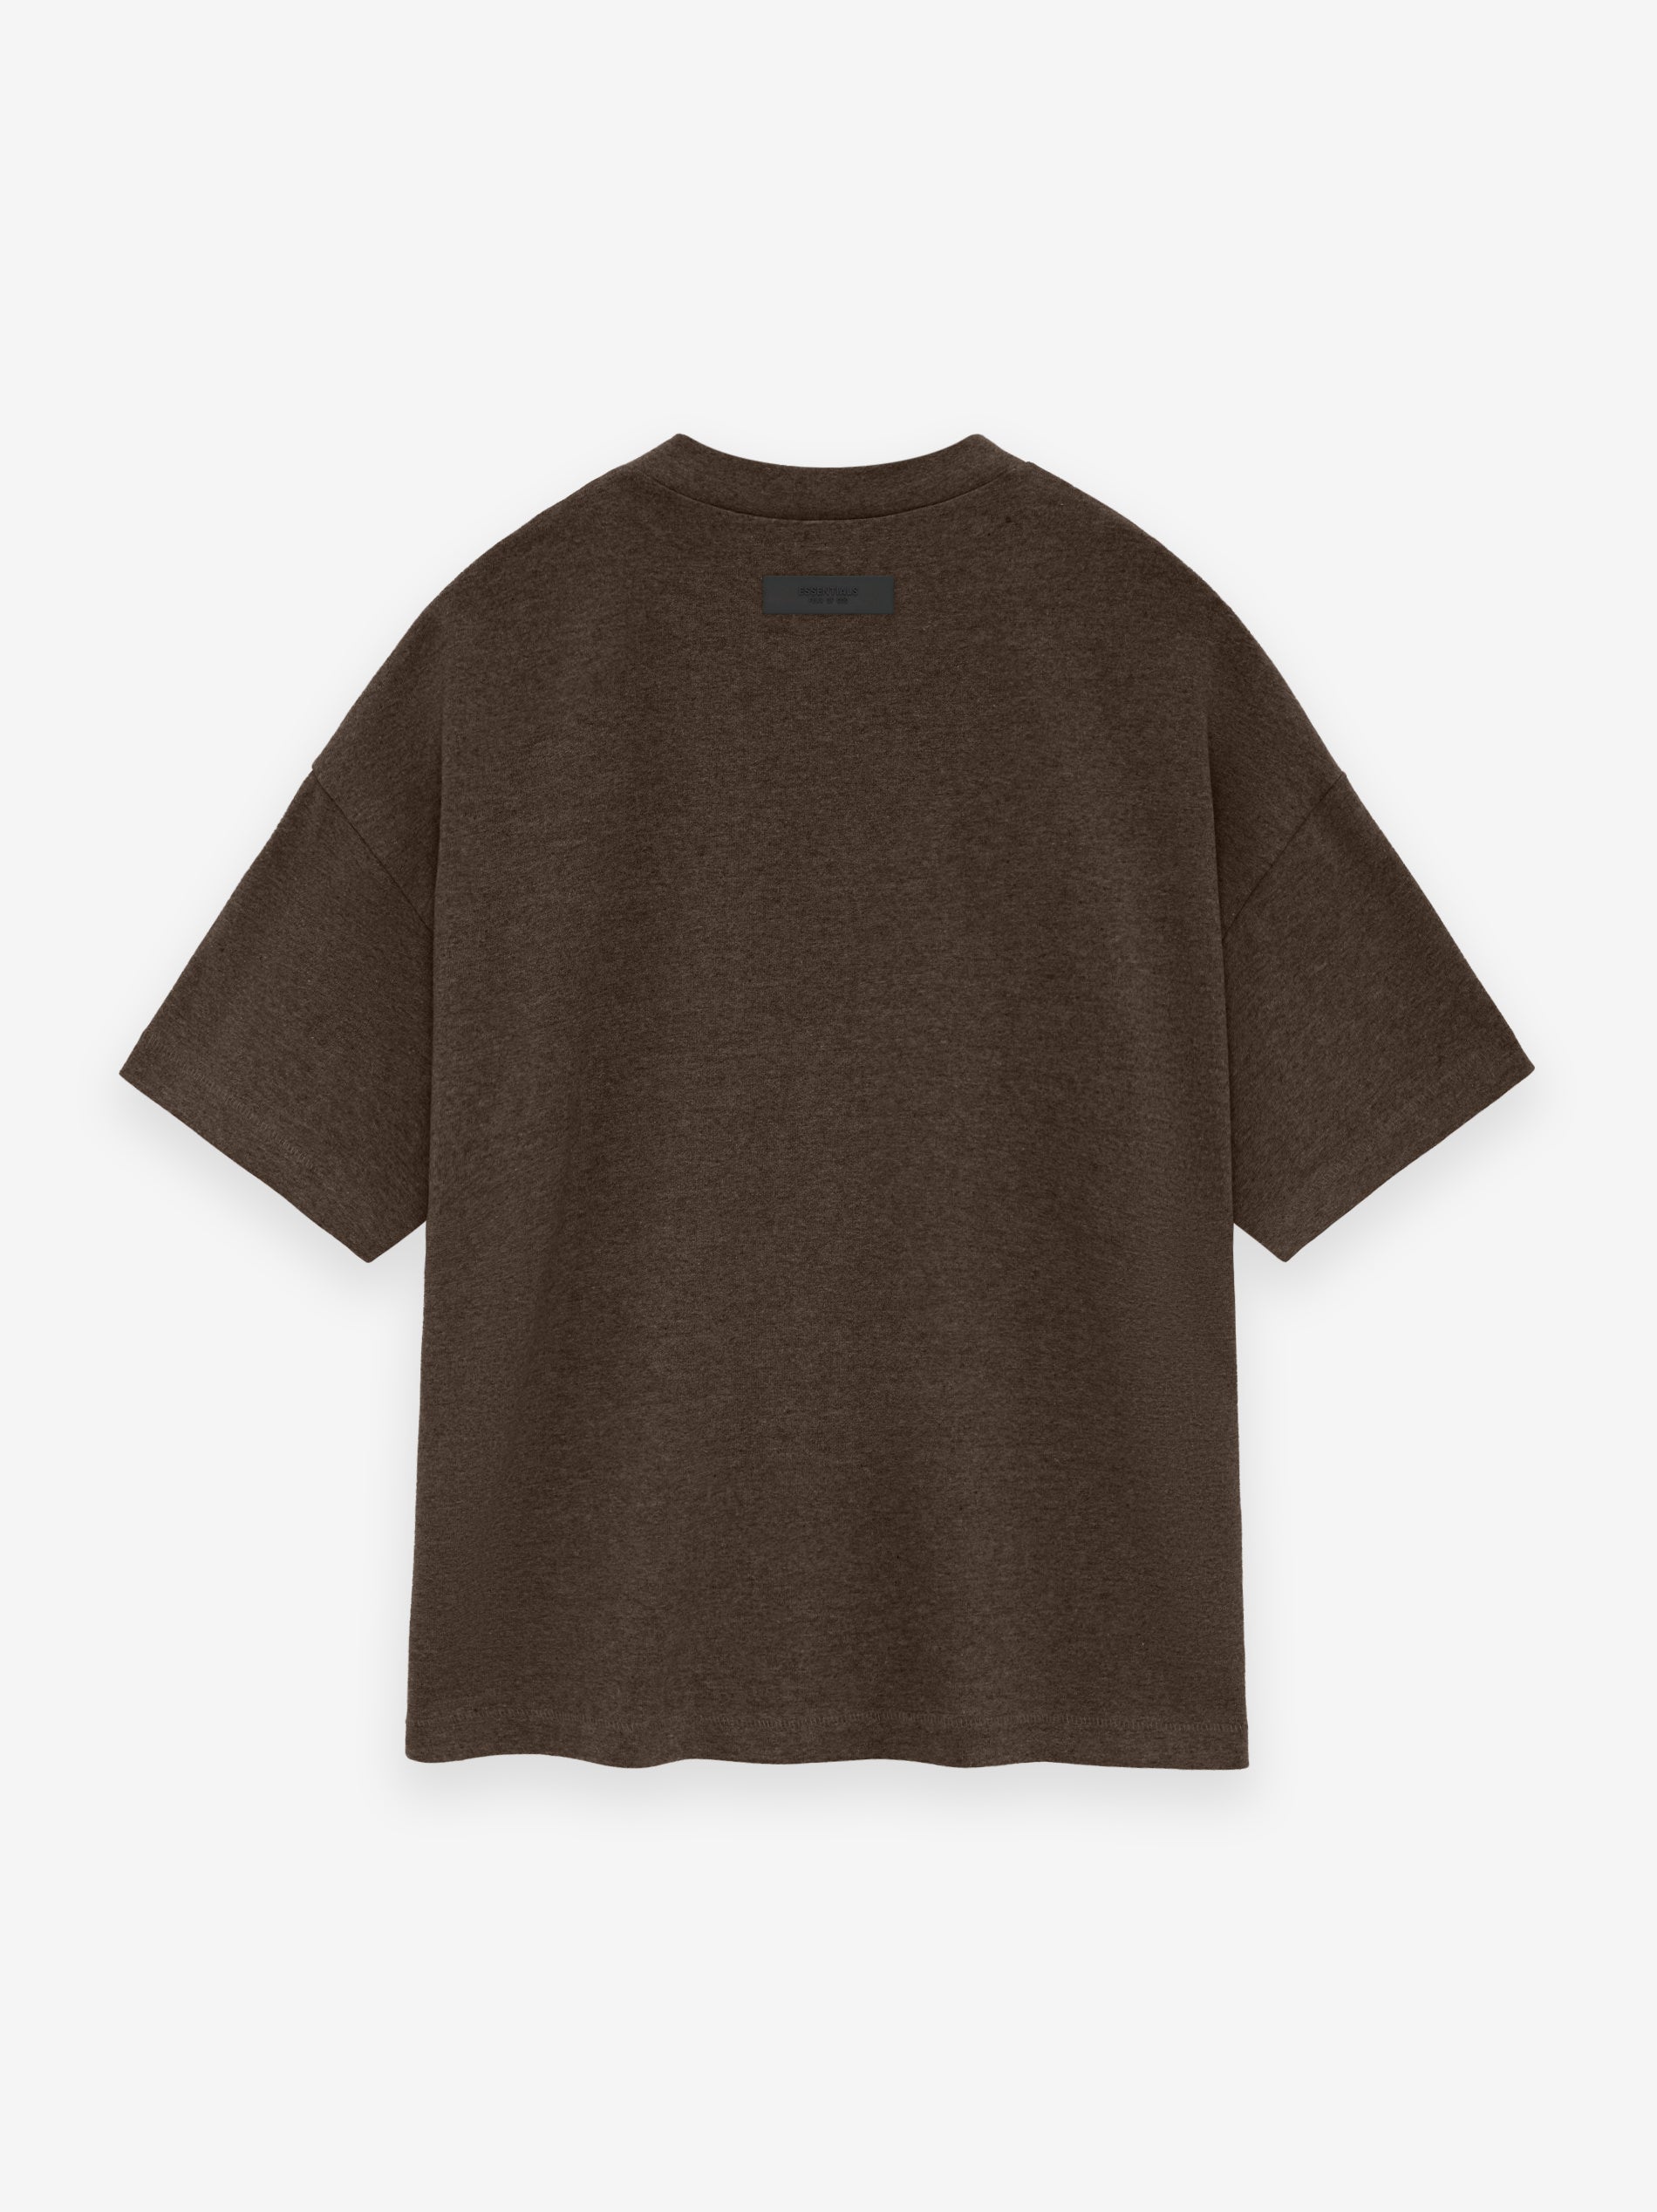 ESSENTIALS HEAVY S/S TEE | Fear of God